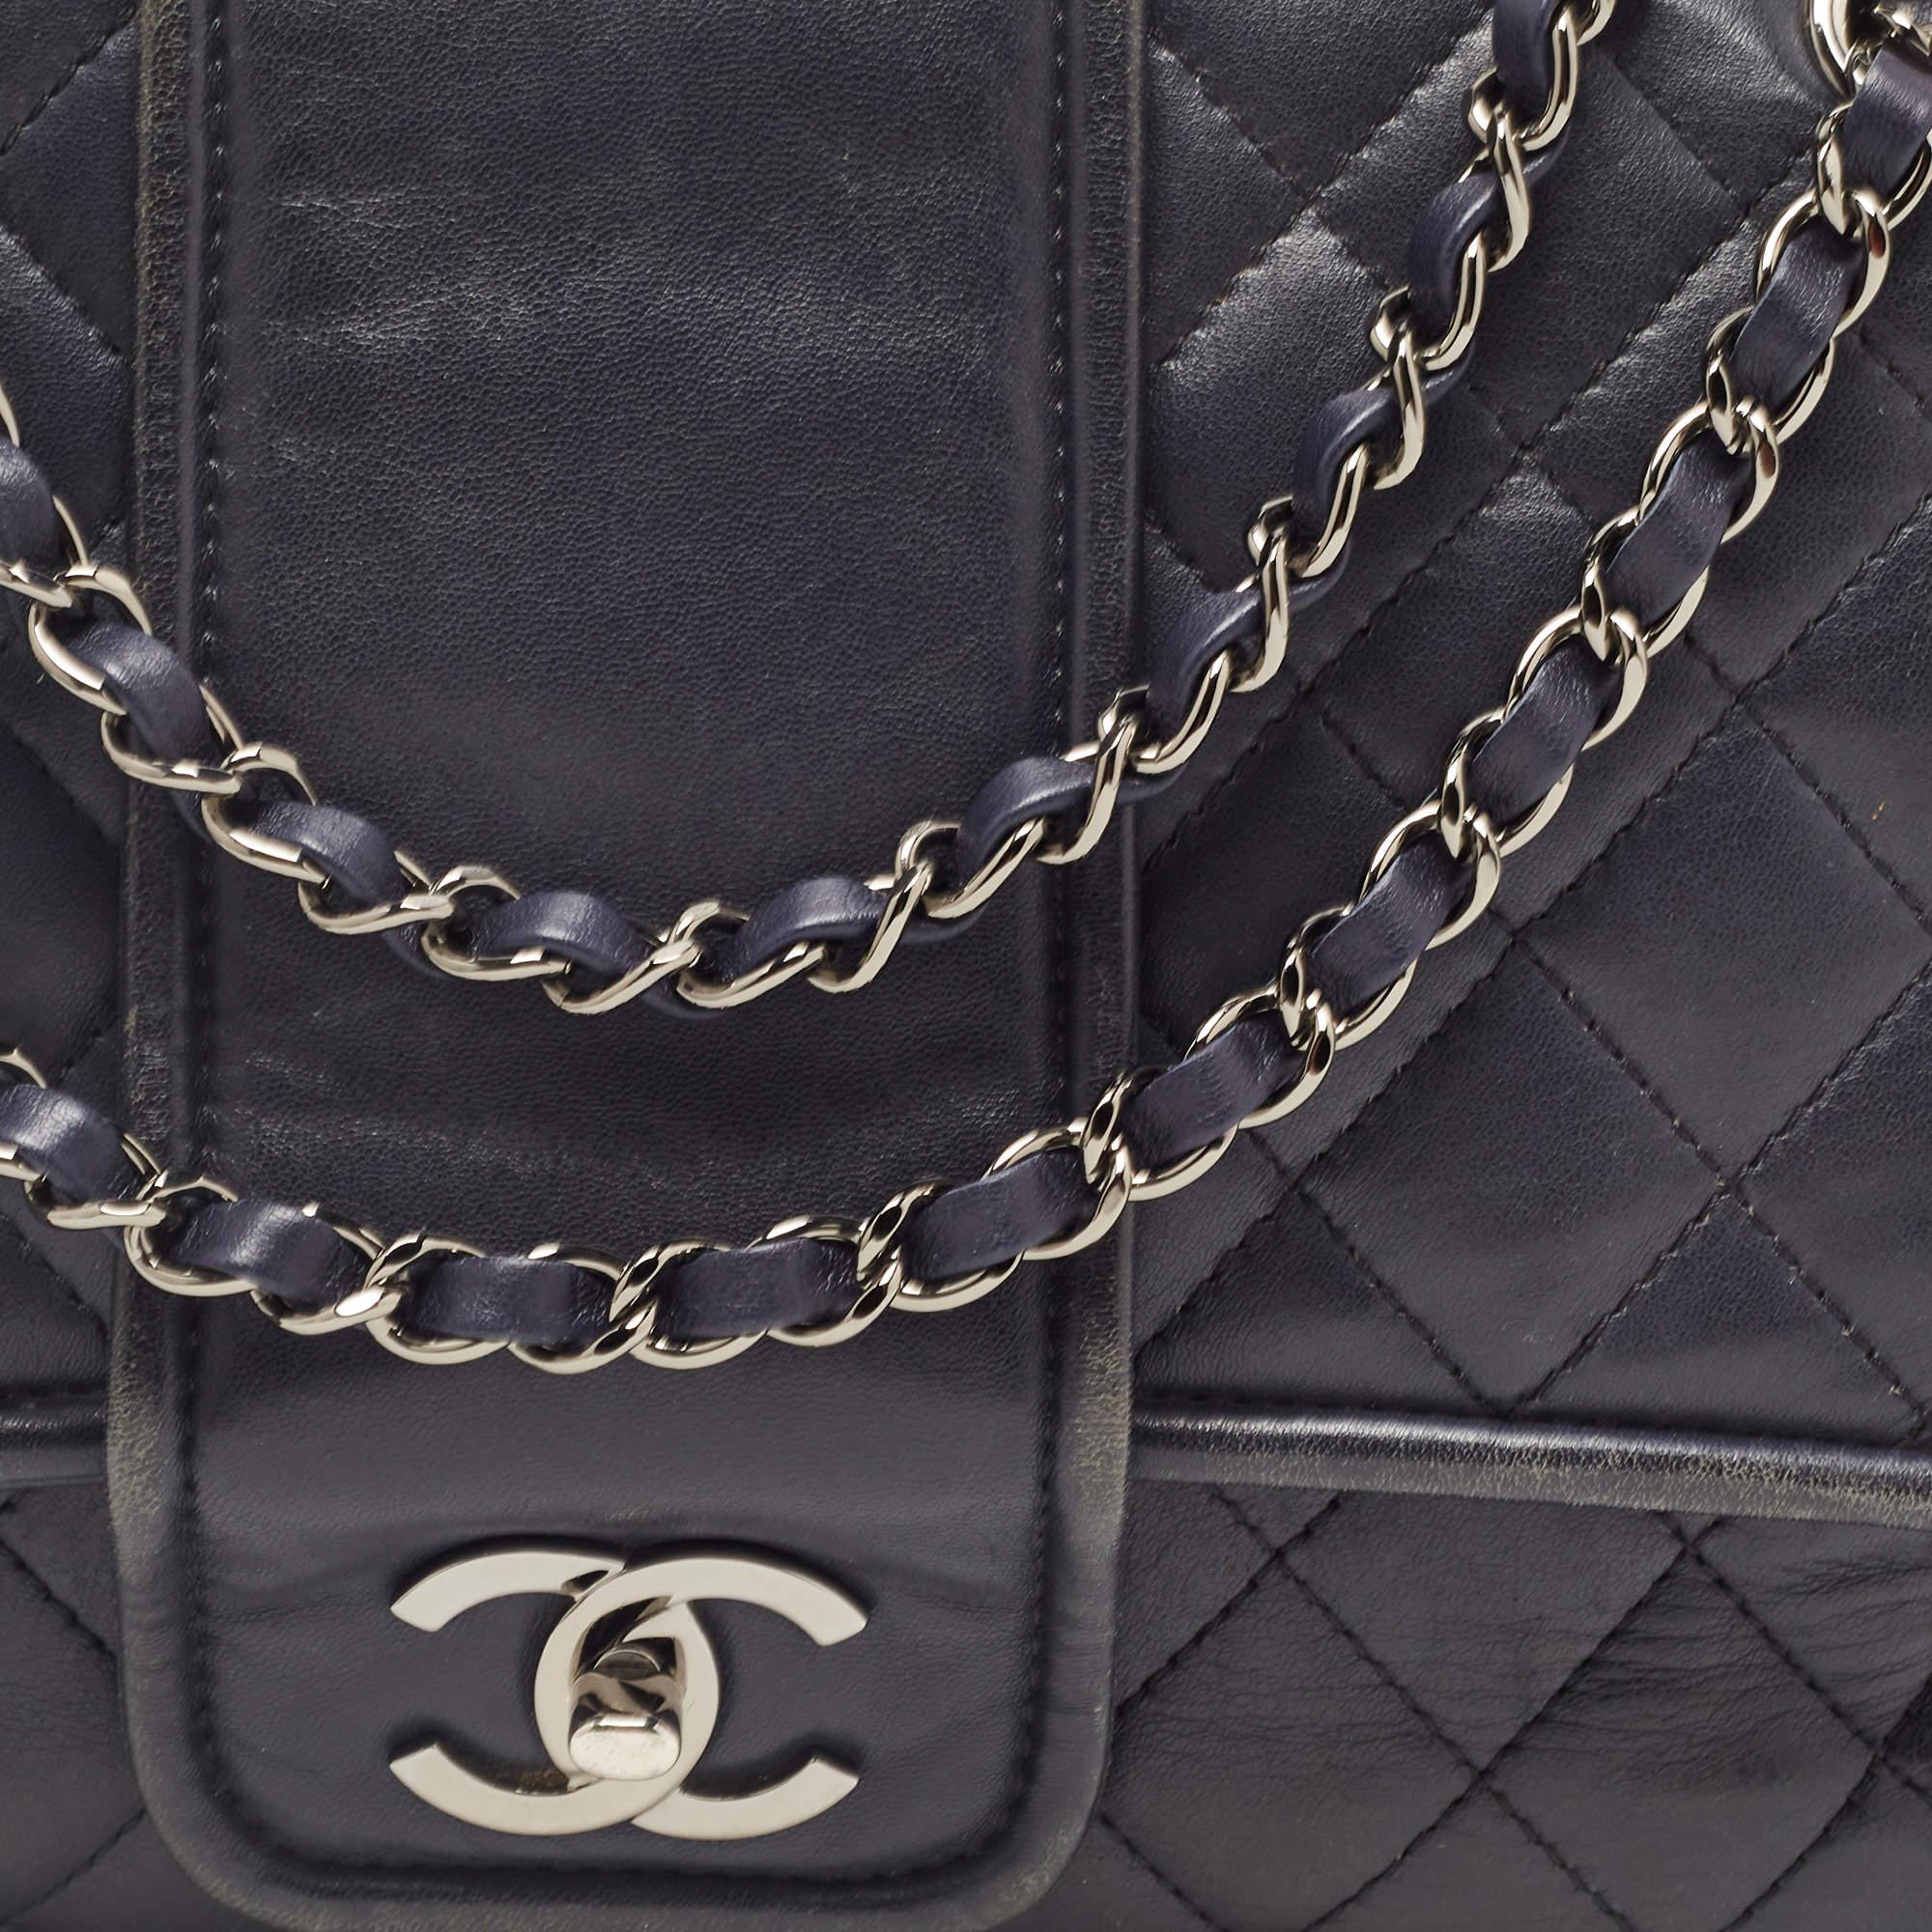 Chanel Navy Blue Quilted Leather Elementary Chic Flap Bag 2